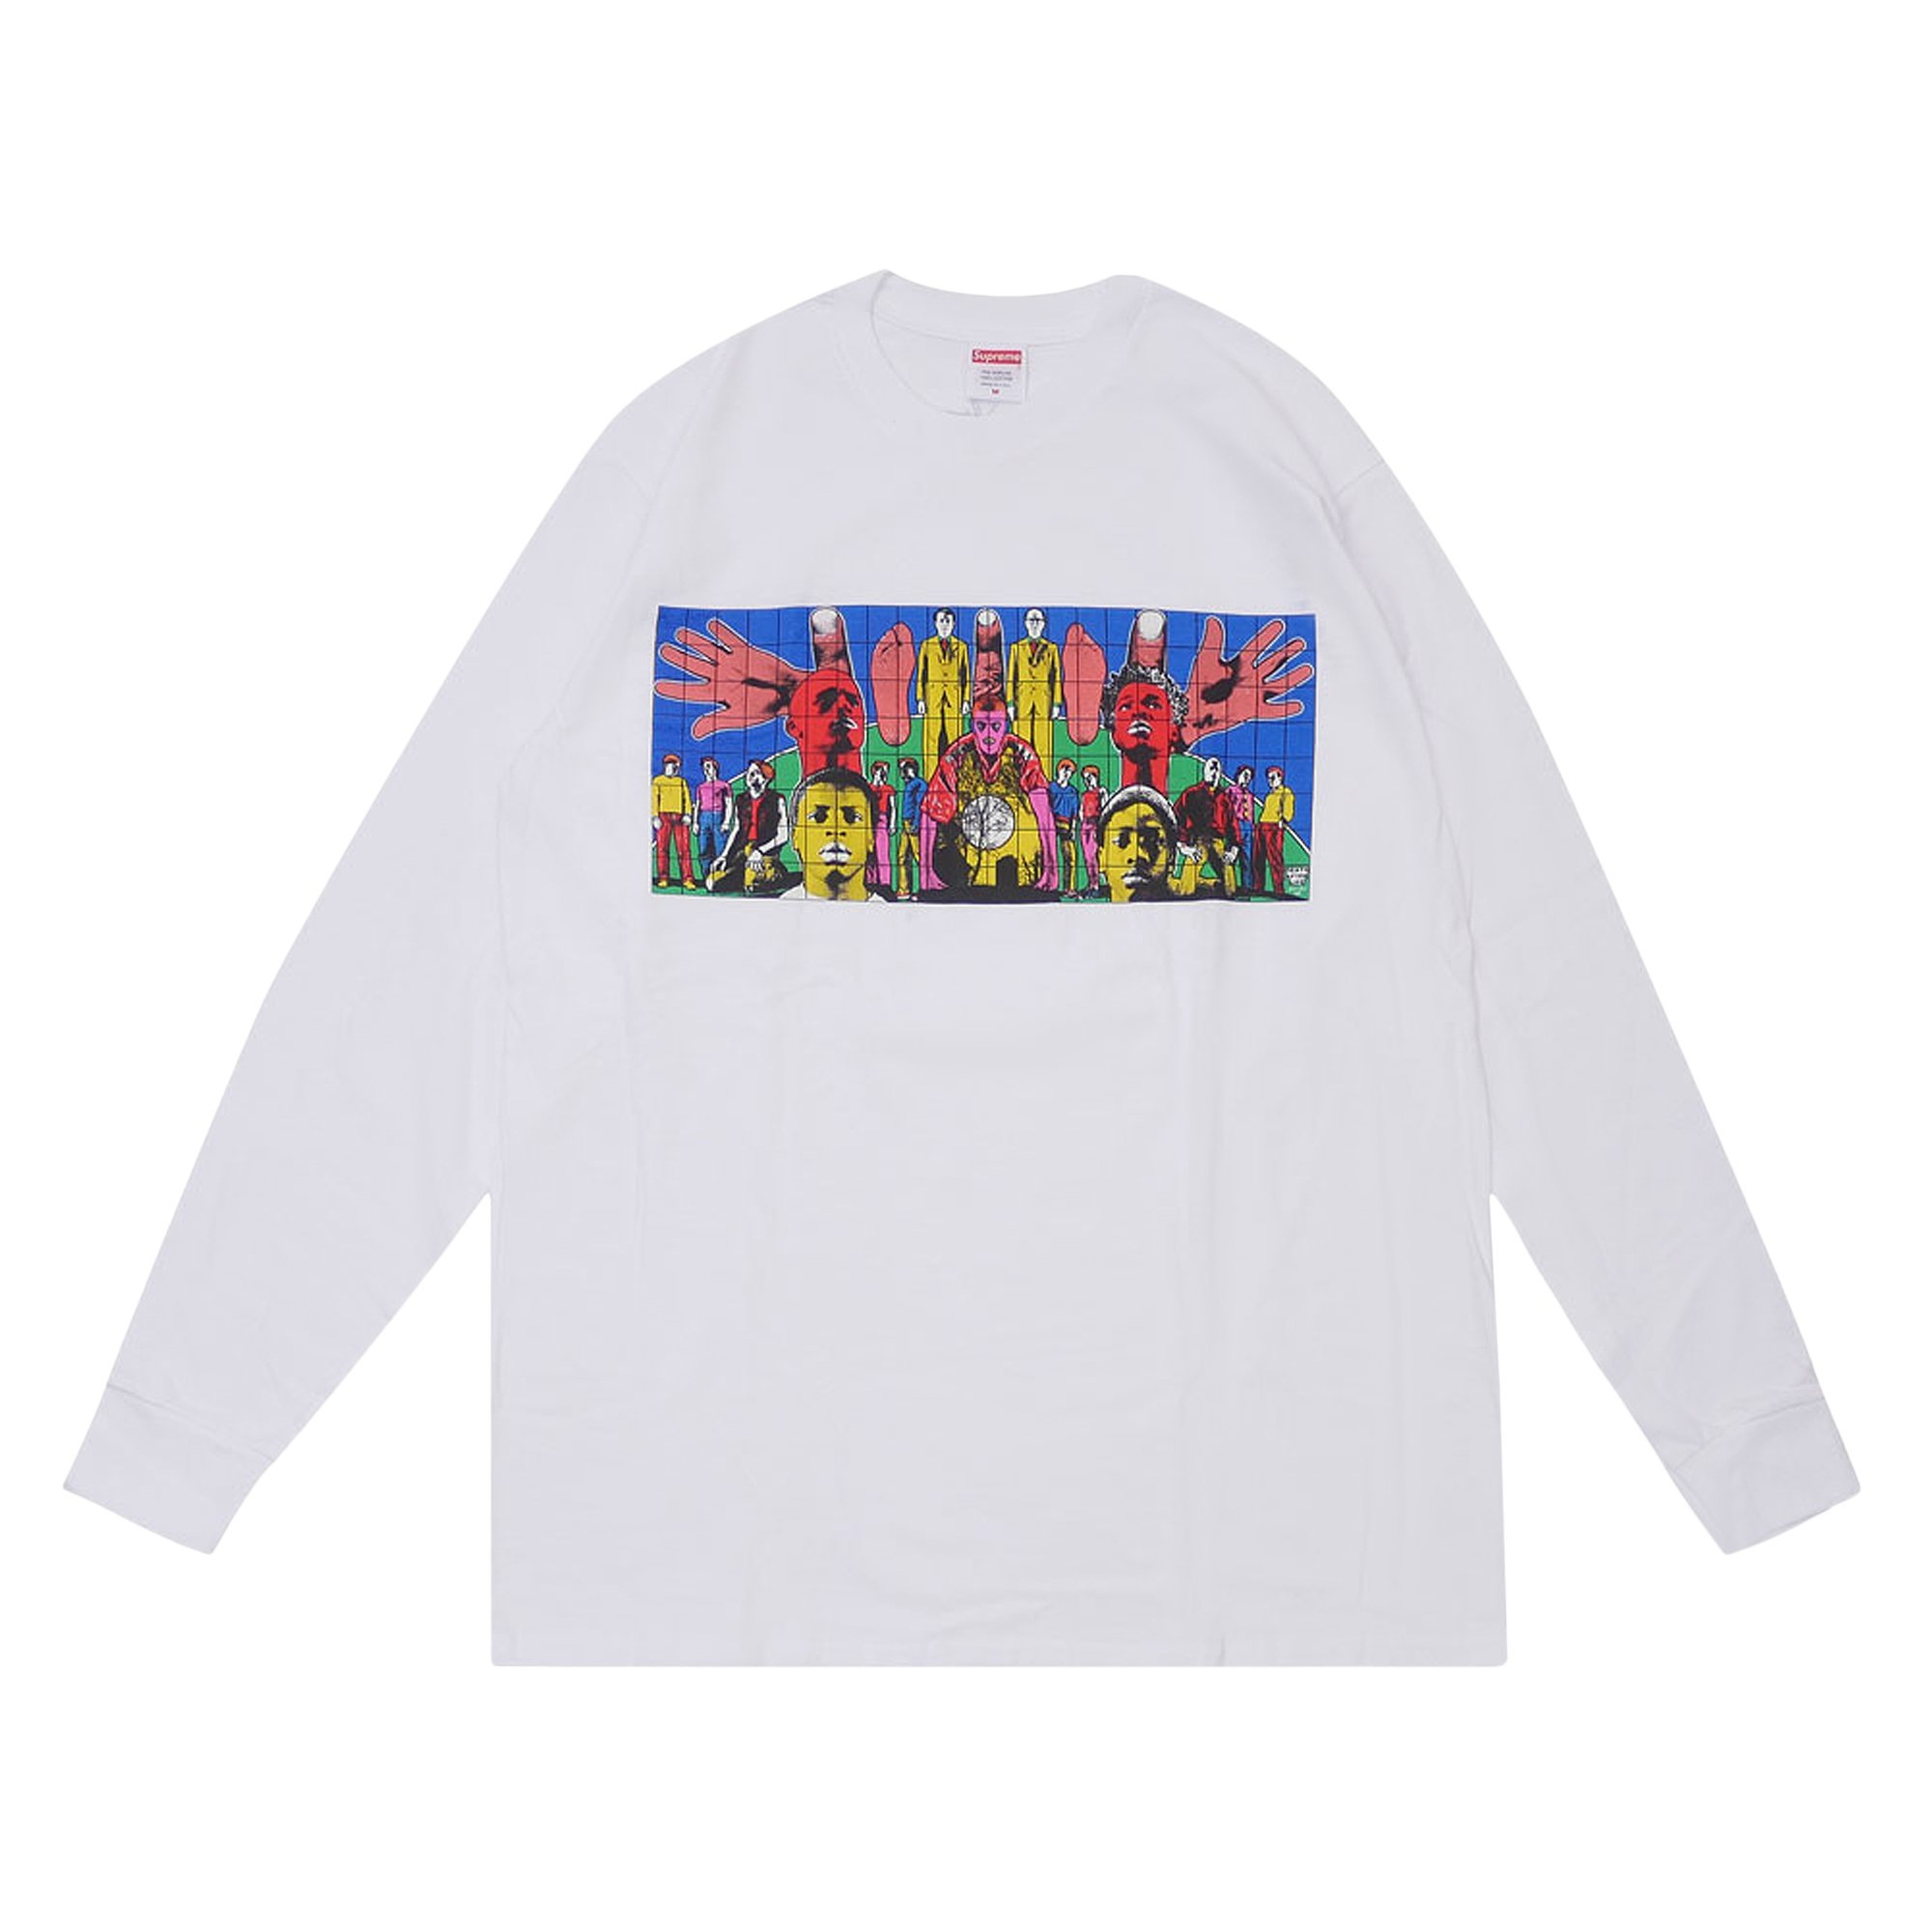 Buy Supreme Gilbert and George DEATH AFTER LIFE Long-Sleeve Tee